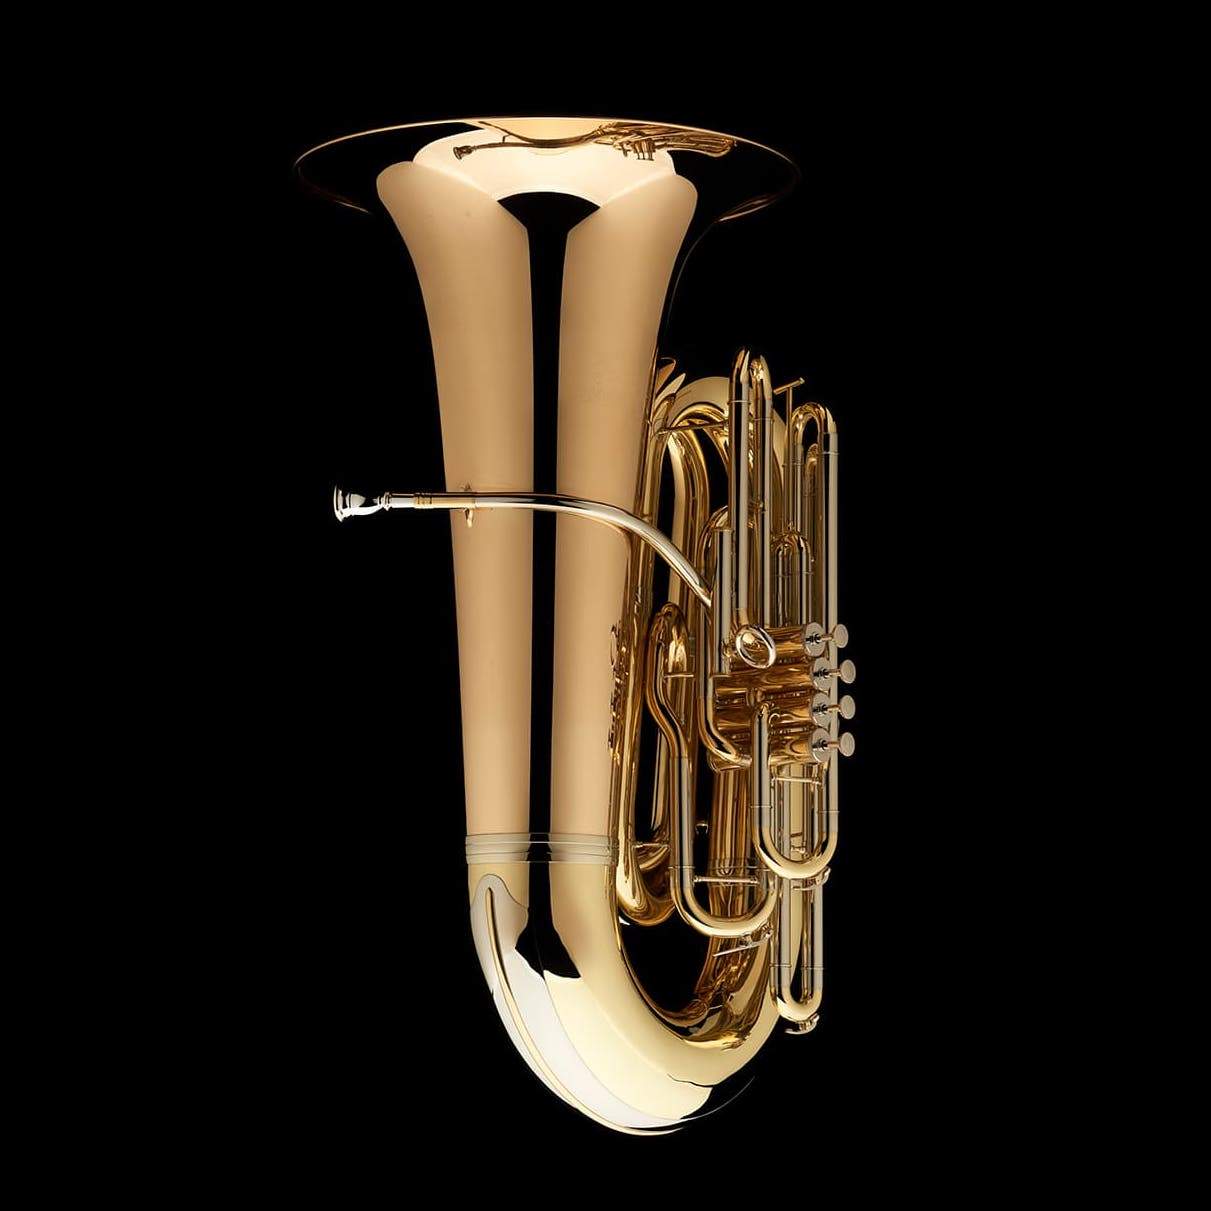 An image of the back of a BBb 6/4 Front-Piston Tuba "Grand" from Wessex Tubas